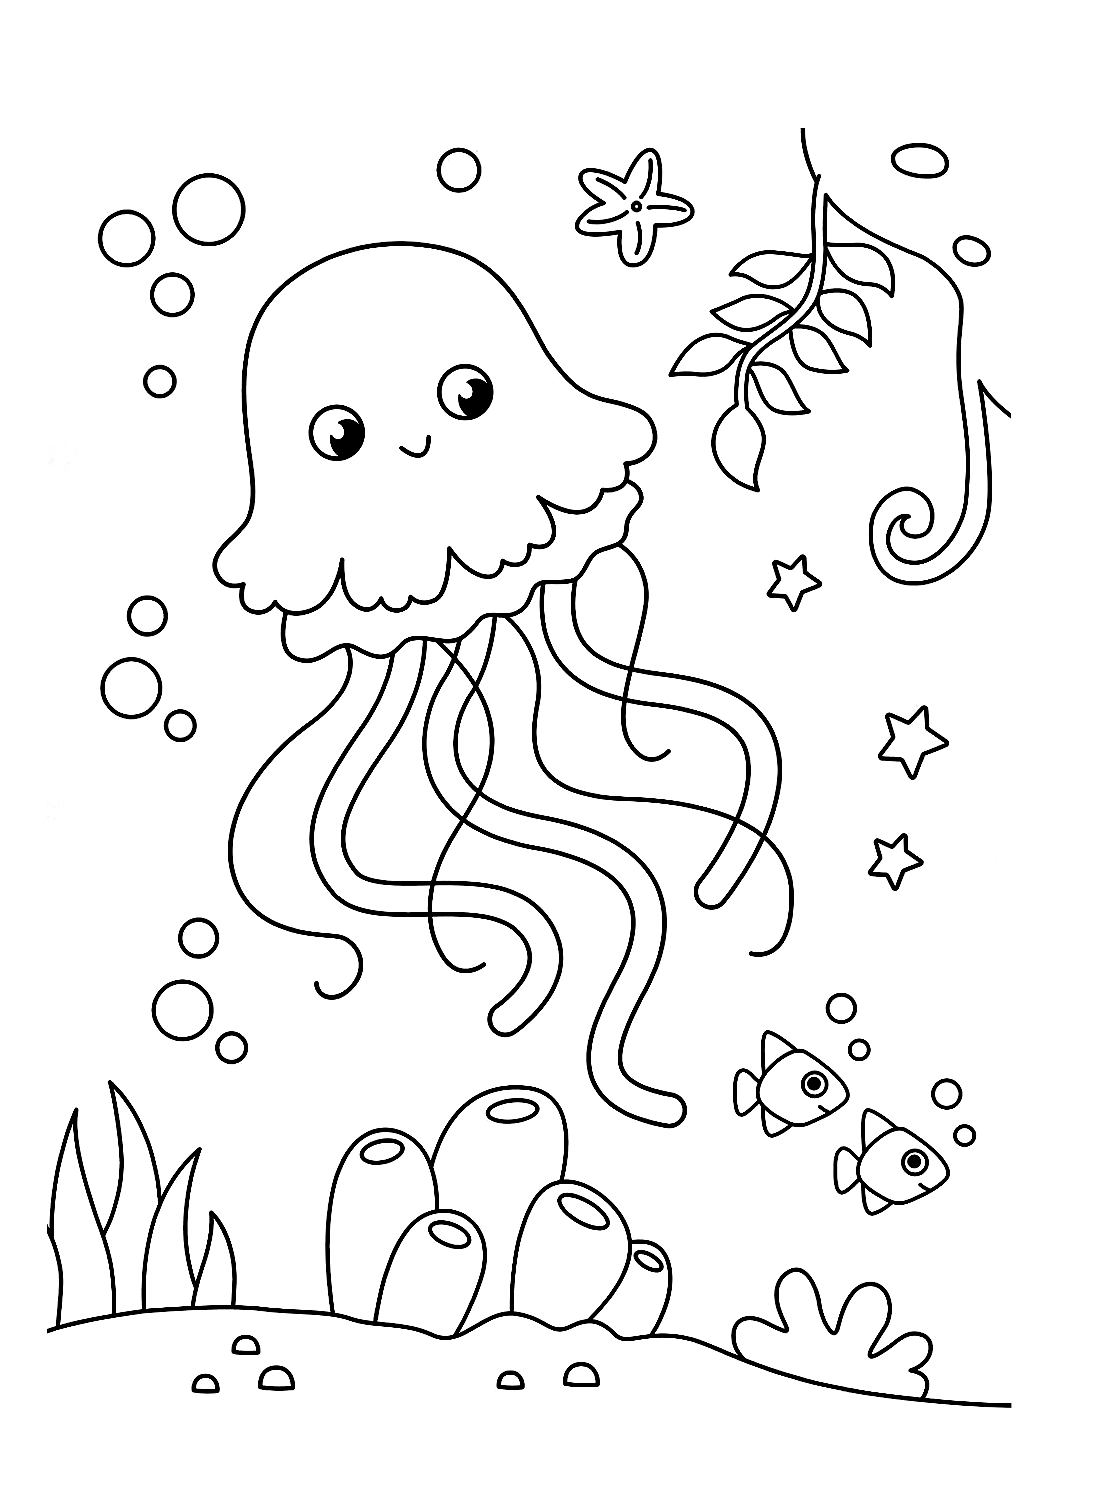 A cute Jellyfish Coloring Page